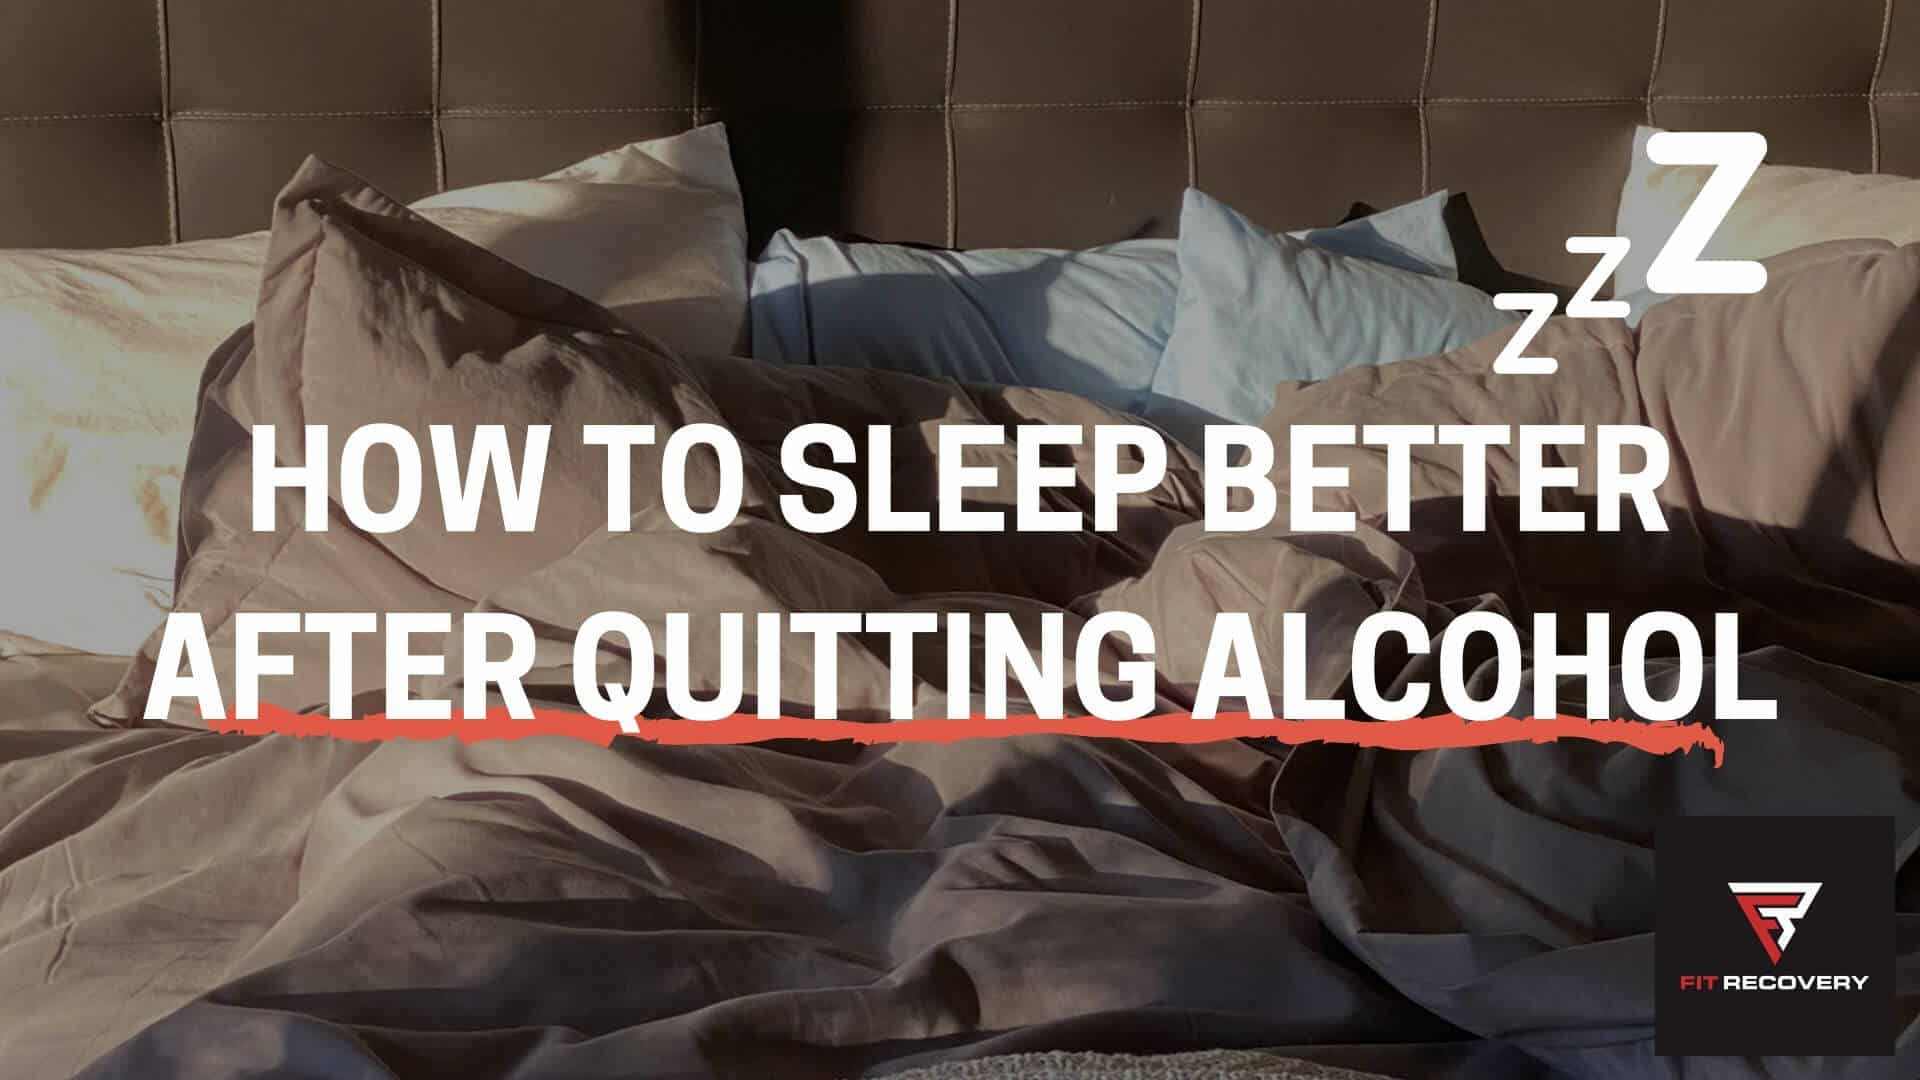 can't sleep without alcohol